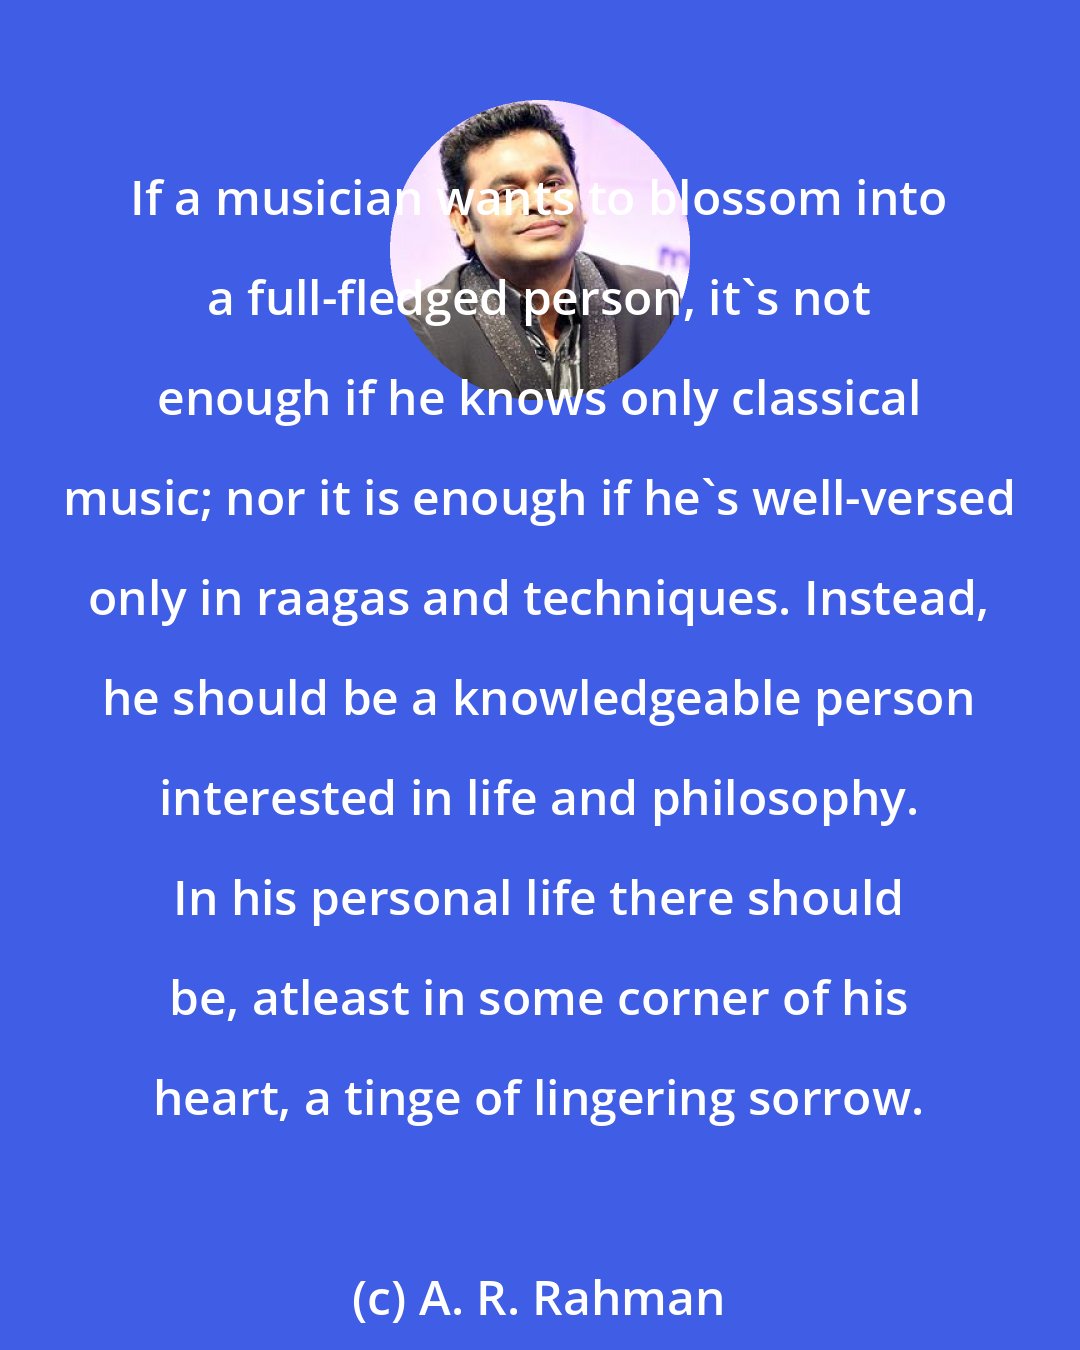 A. R. Rahman: If a musician wants to blossom into a full-fledged person, it's not enough if he knows only classical music; nor it is enough if he's well-versed only in raagas and techniques. Instead, he should be a knowledgeable person interested in life and philosophy. In his personal life there should be, atleast in some corner of his heart, a tinge of lingering sorrow.